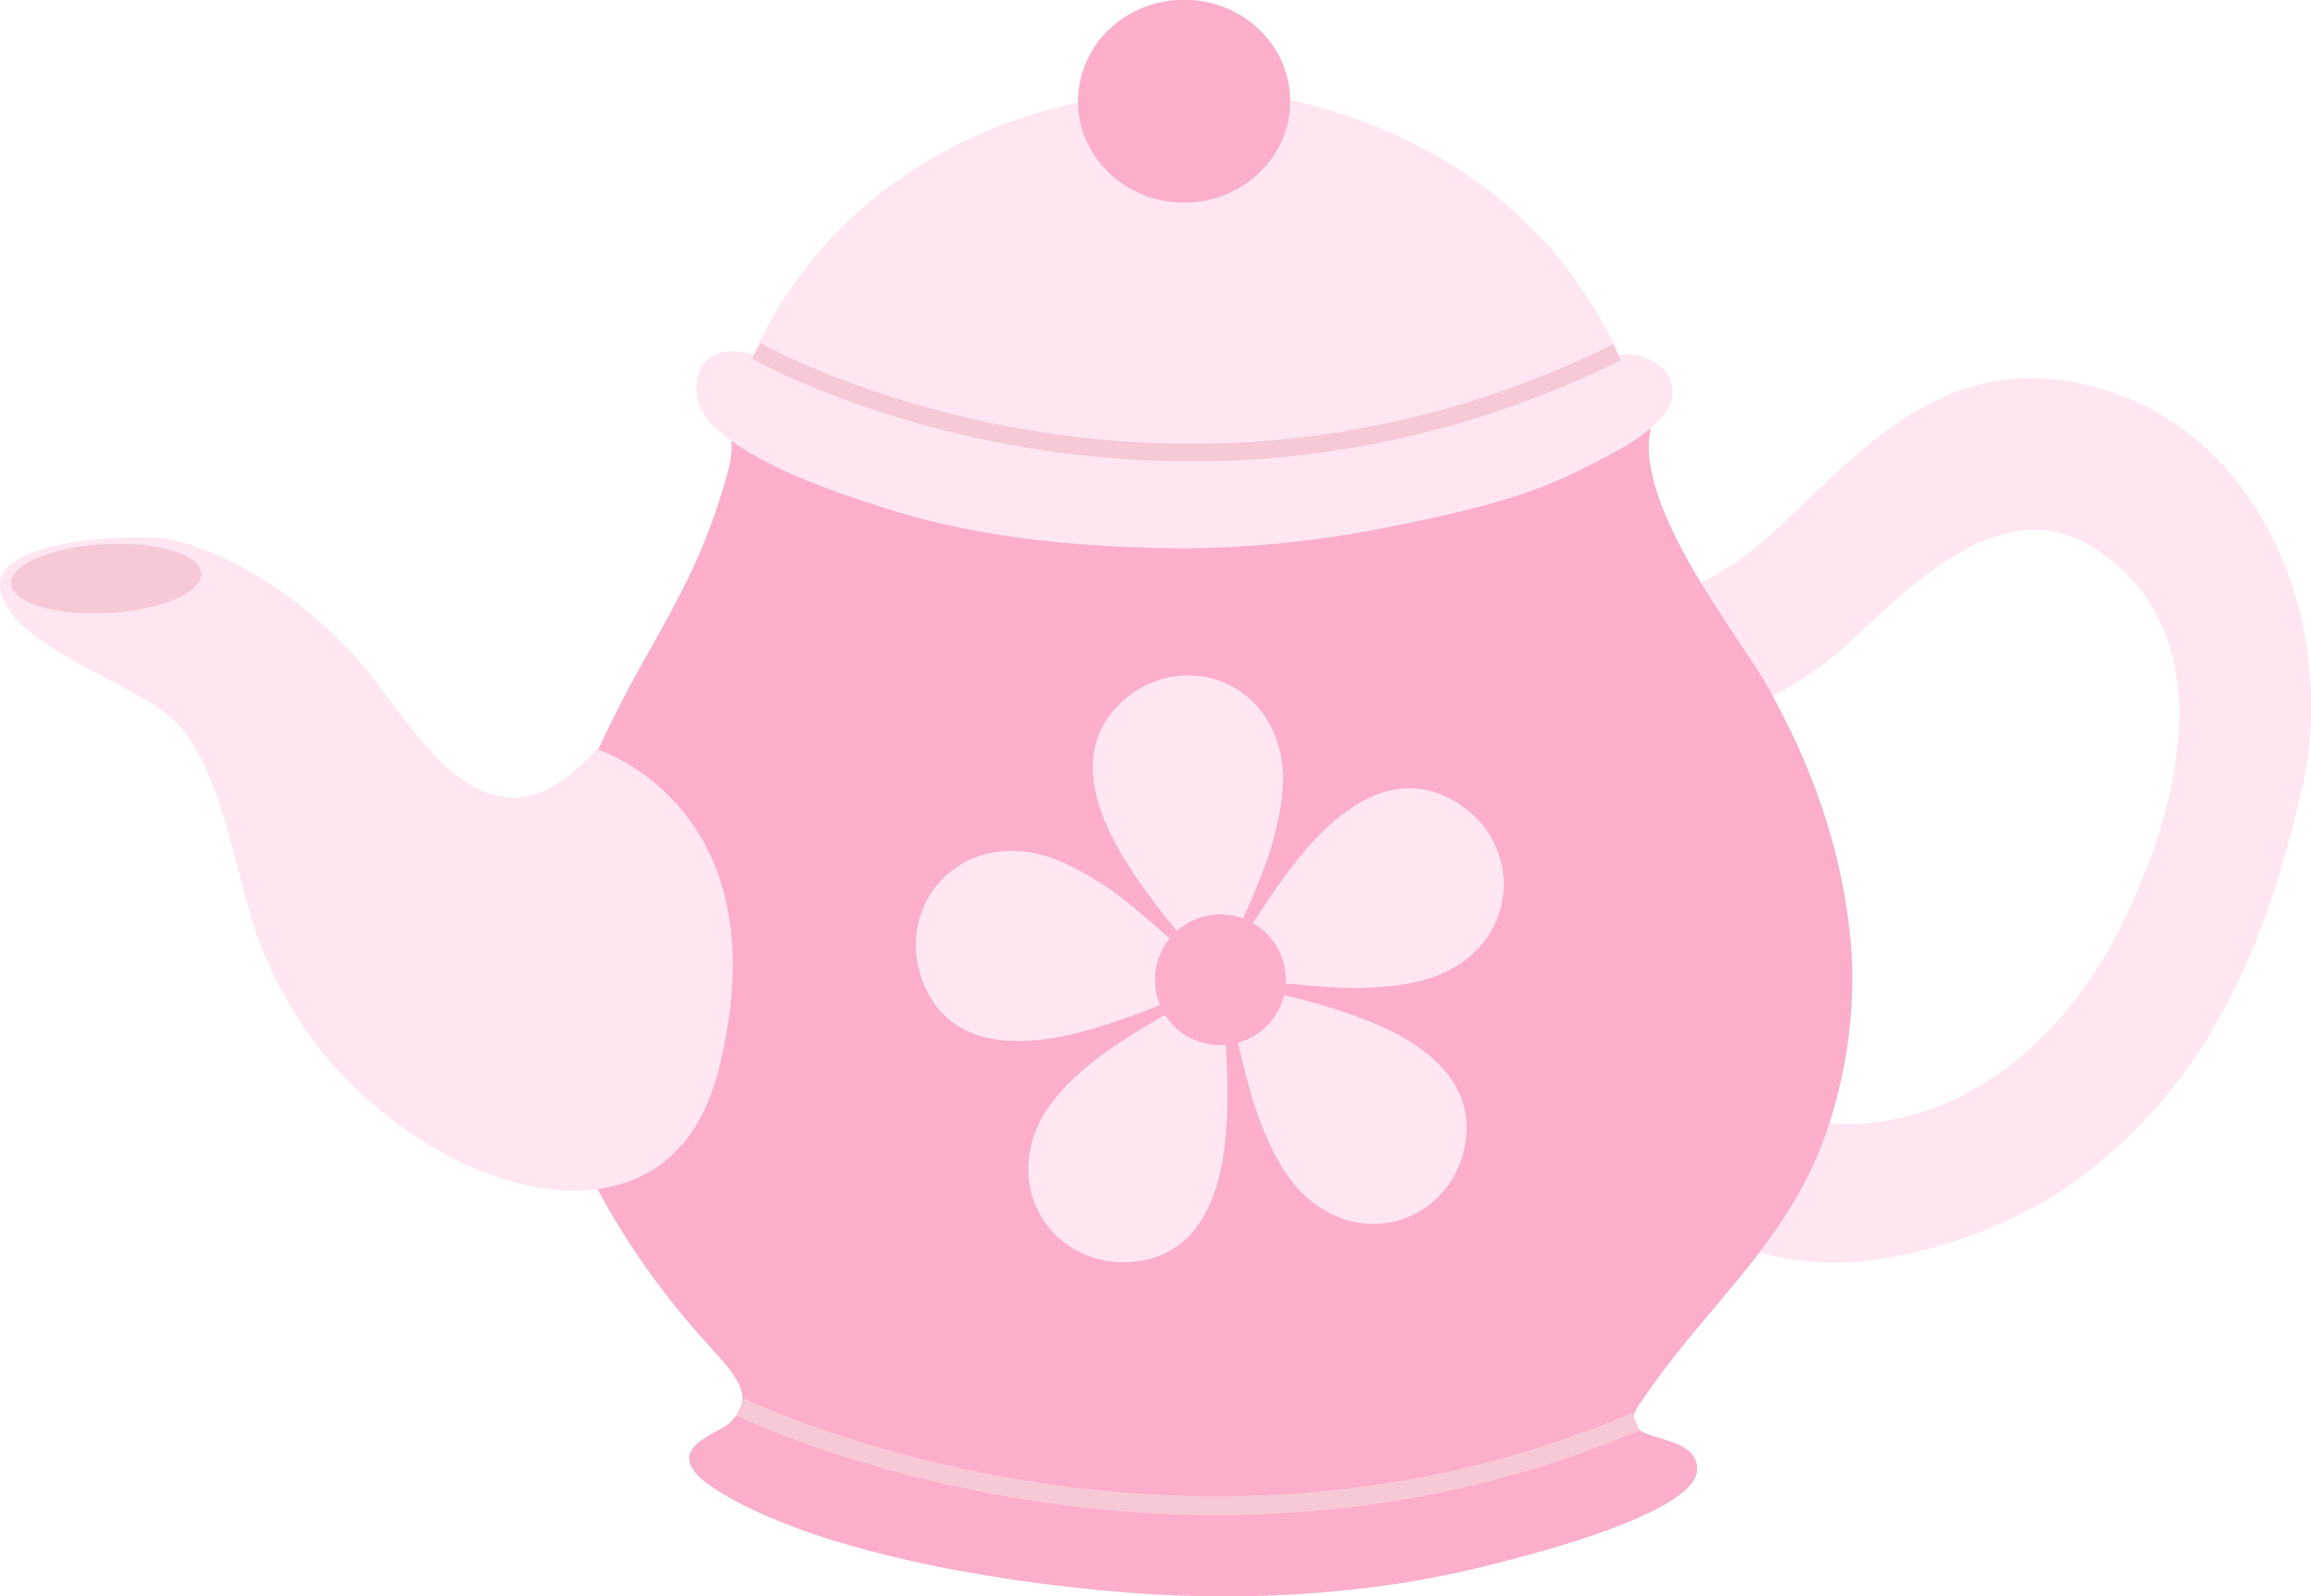 https://clipart-library.com/newhp/teapot_pink.png